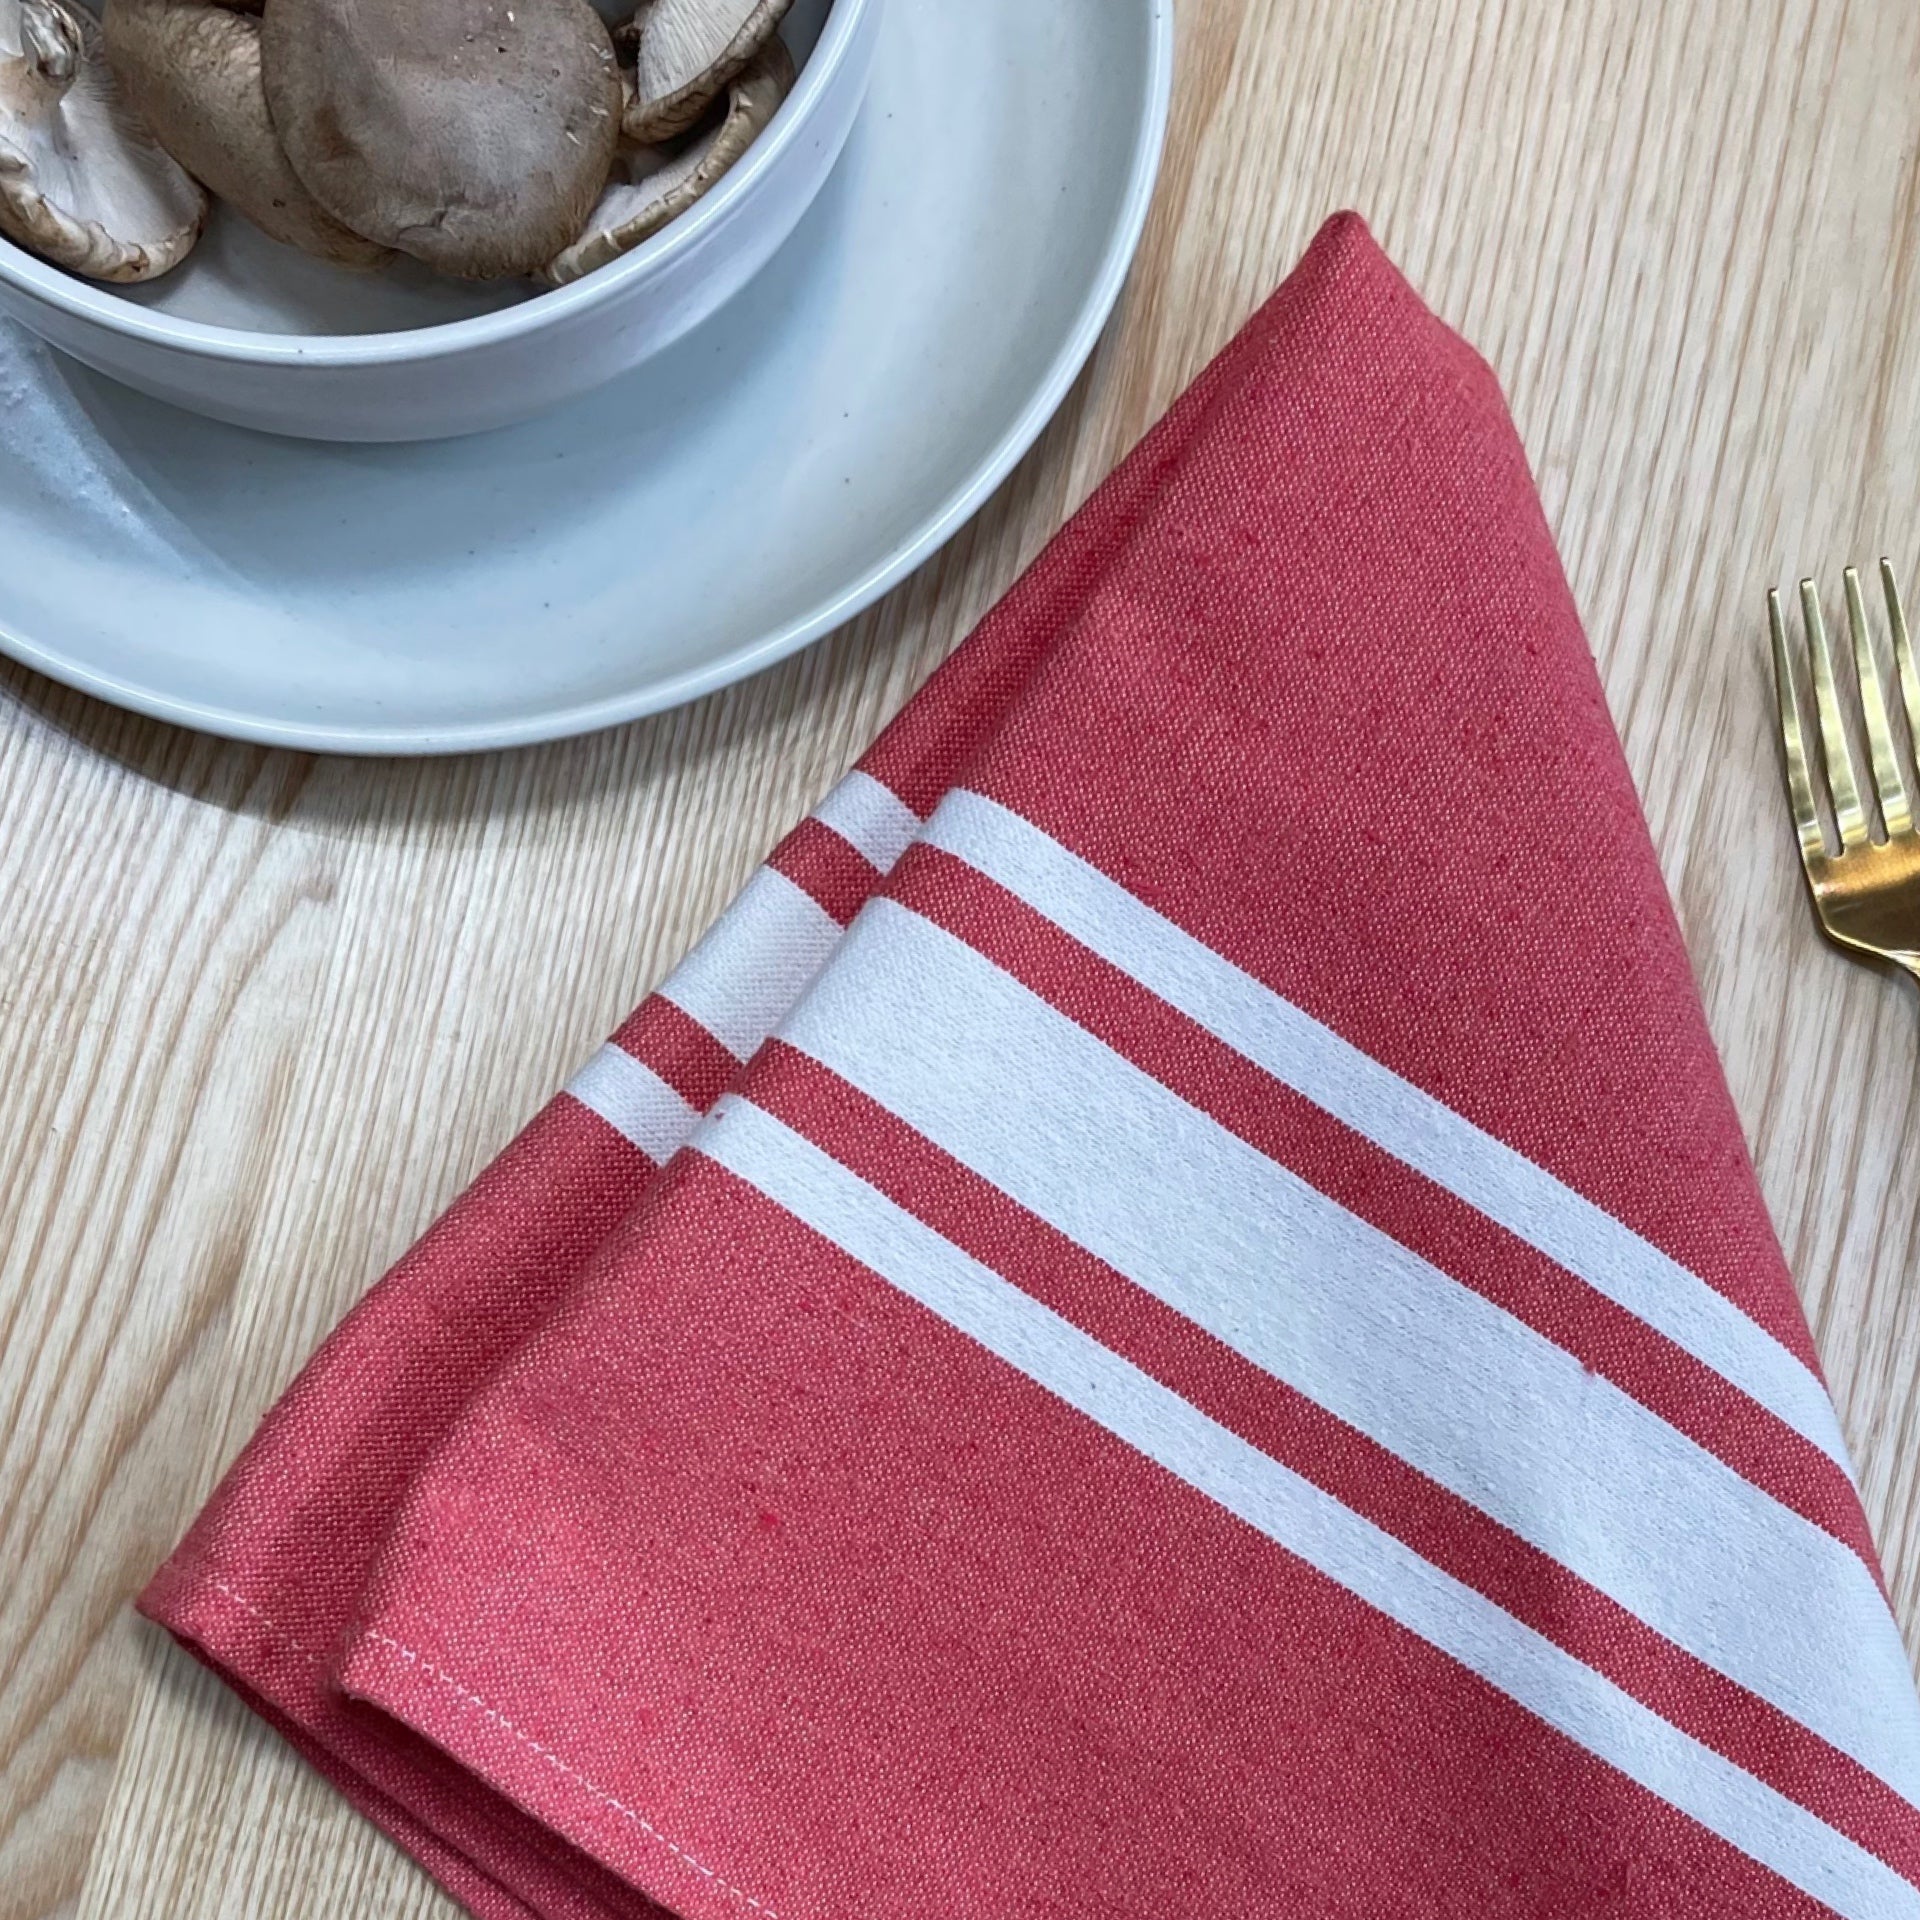 Jamil Handwoven Napkin (Set of 2) - Berry Punch